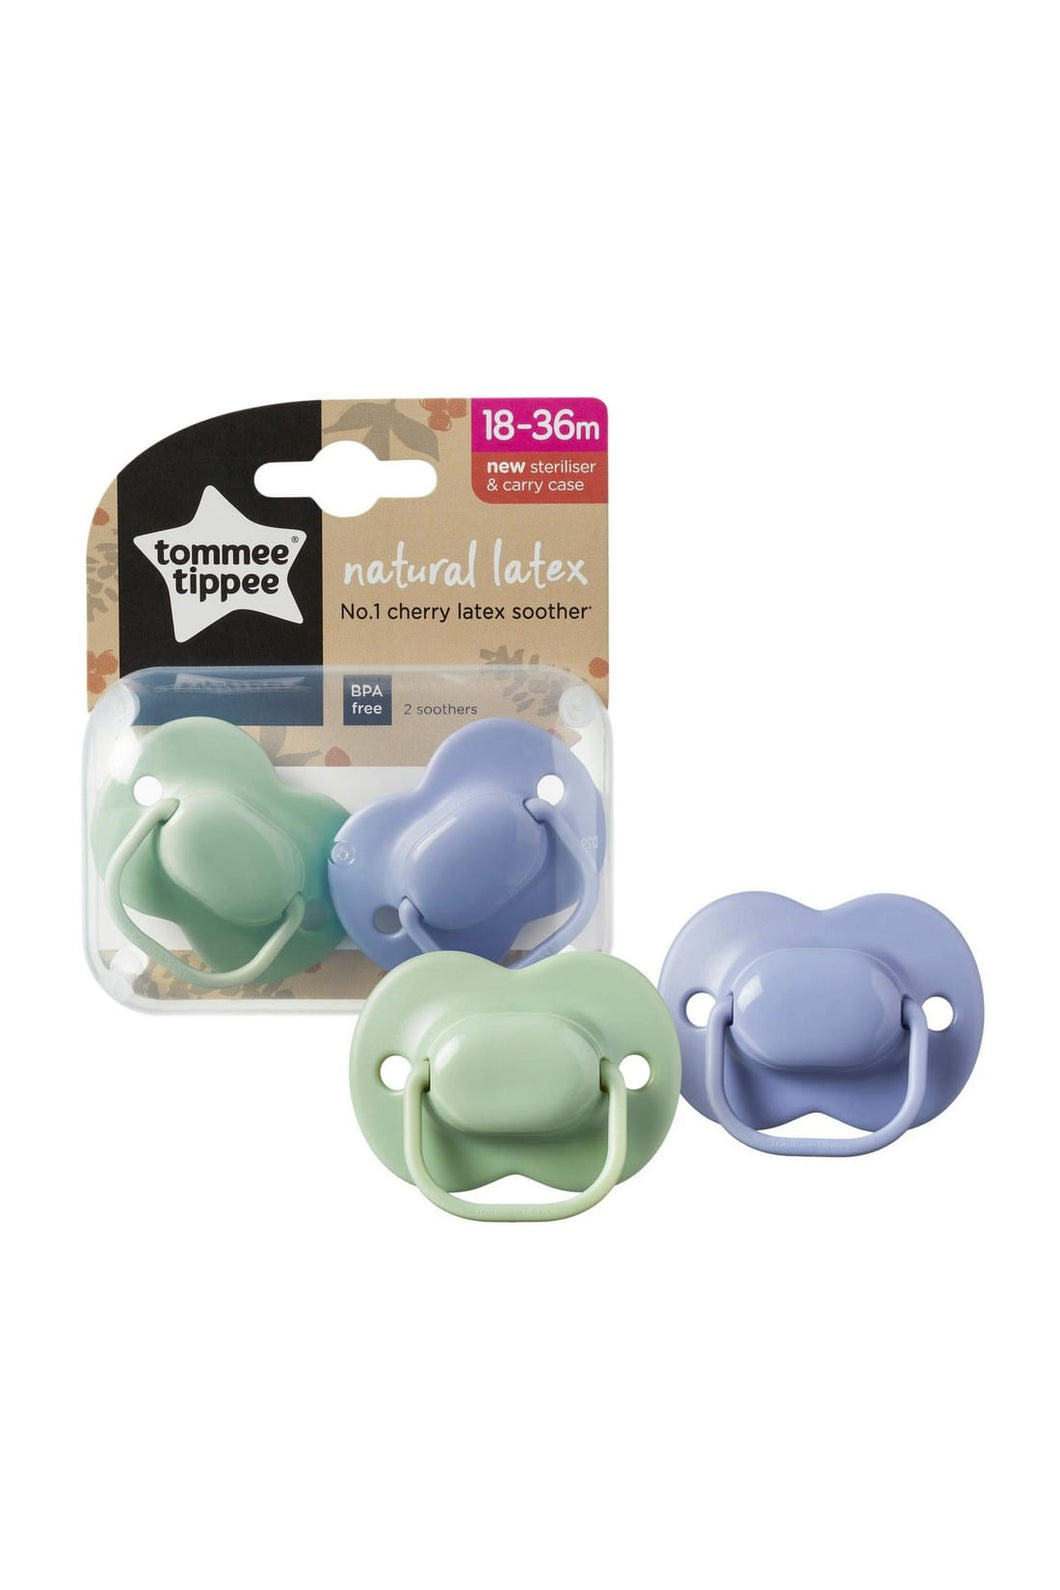 Tommee Tippee 18-36M Natural Latex Soother 1